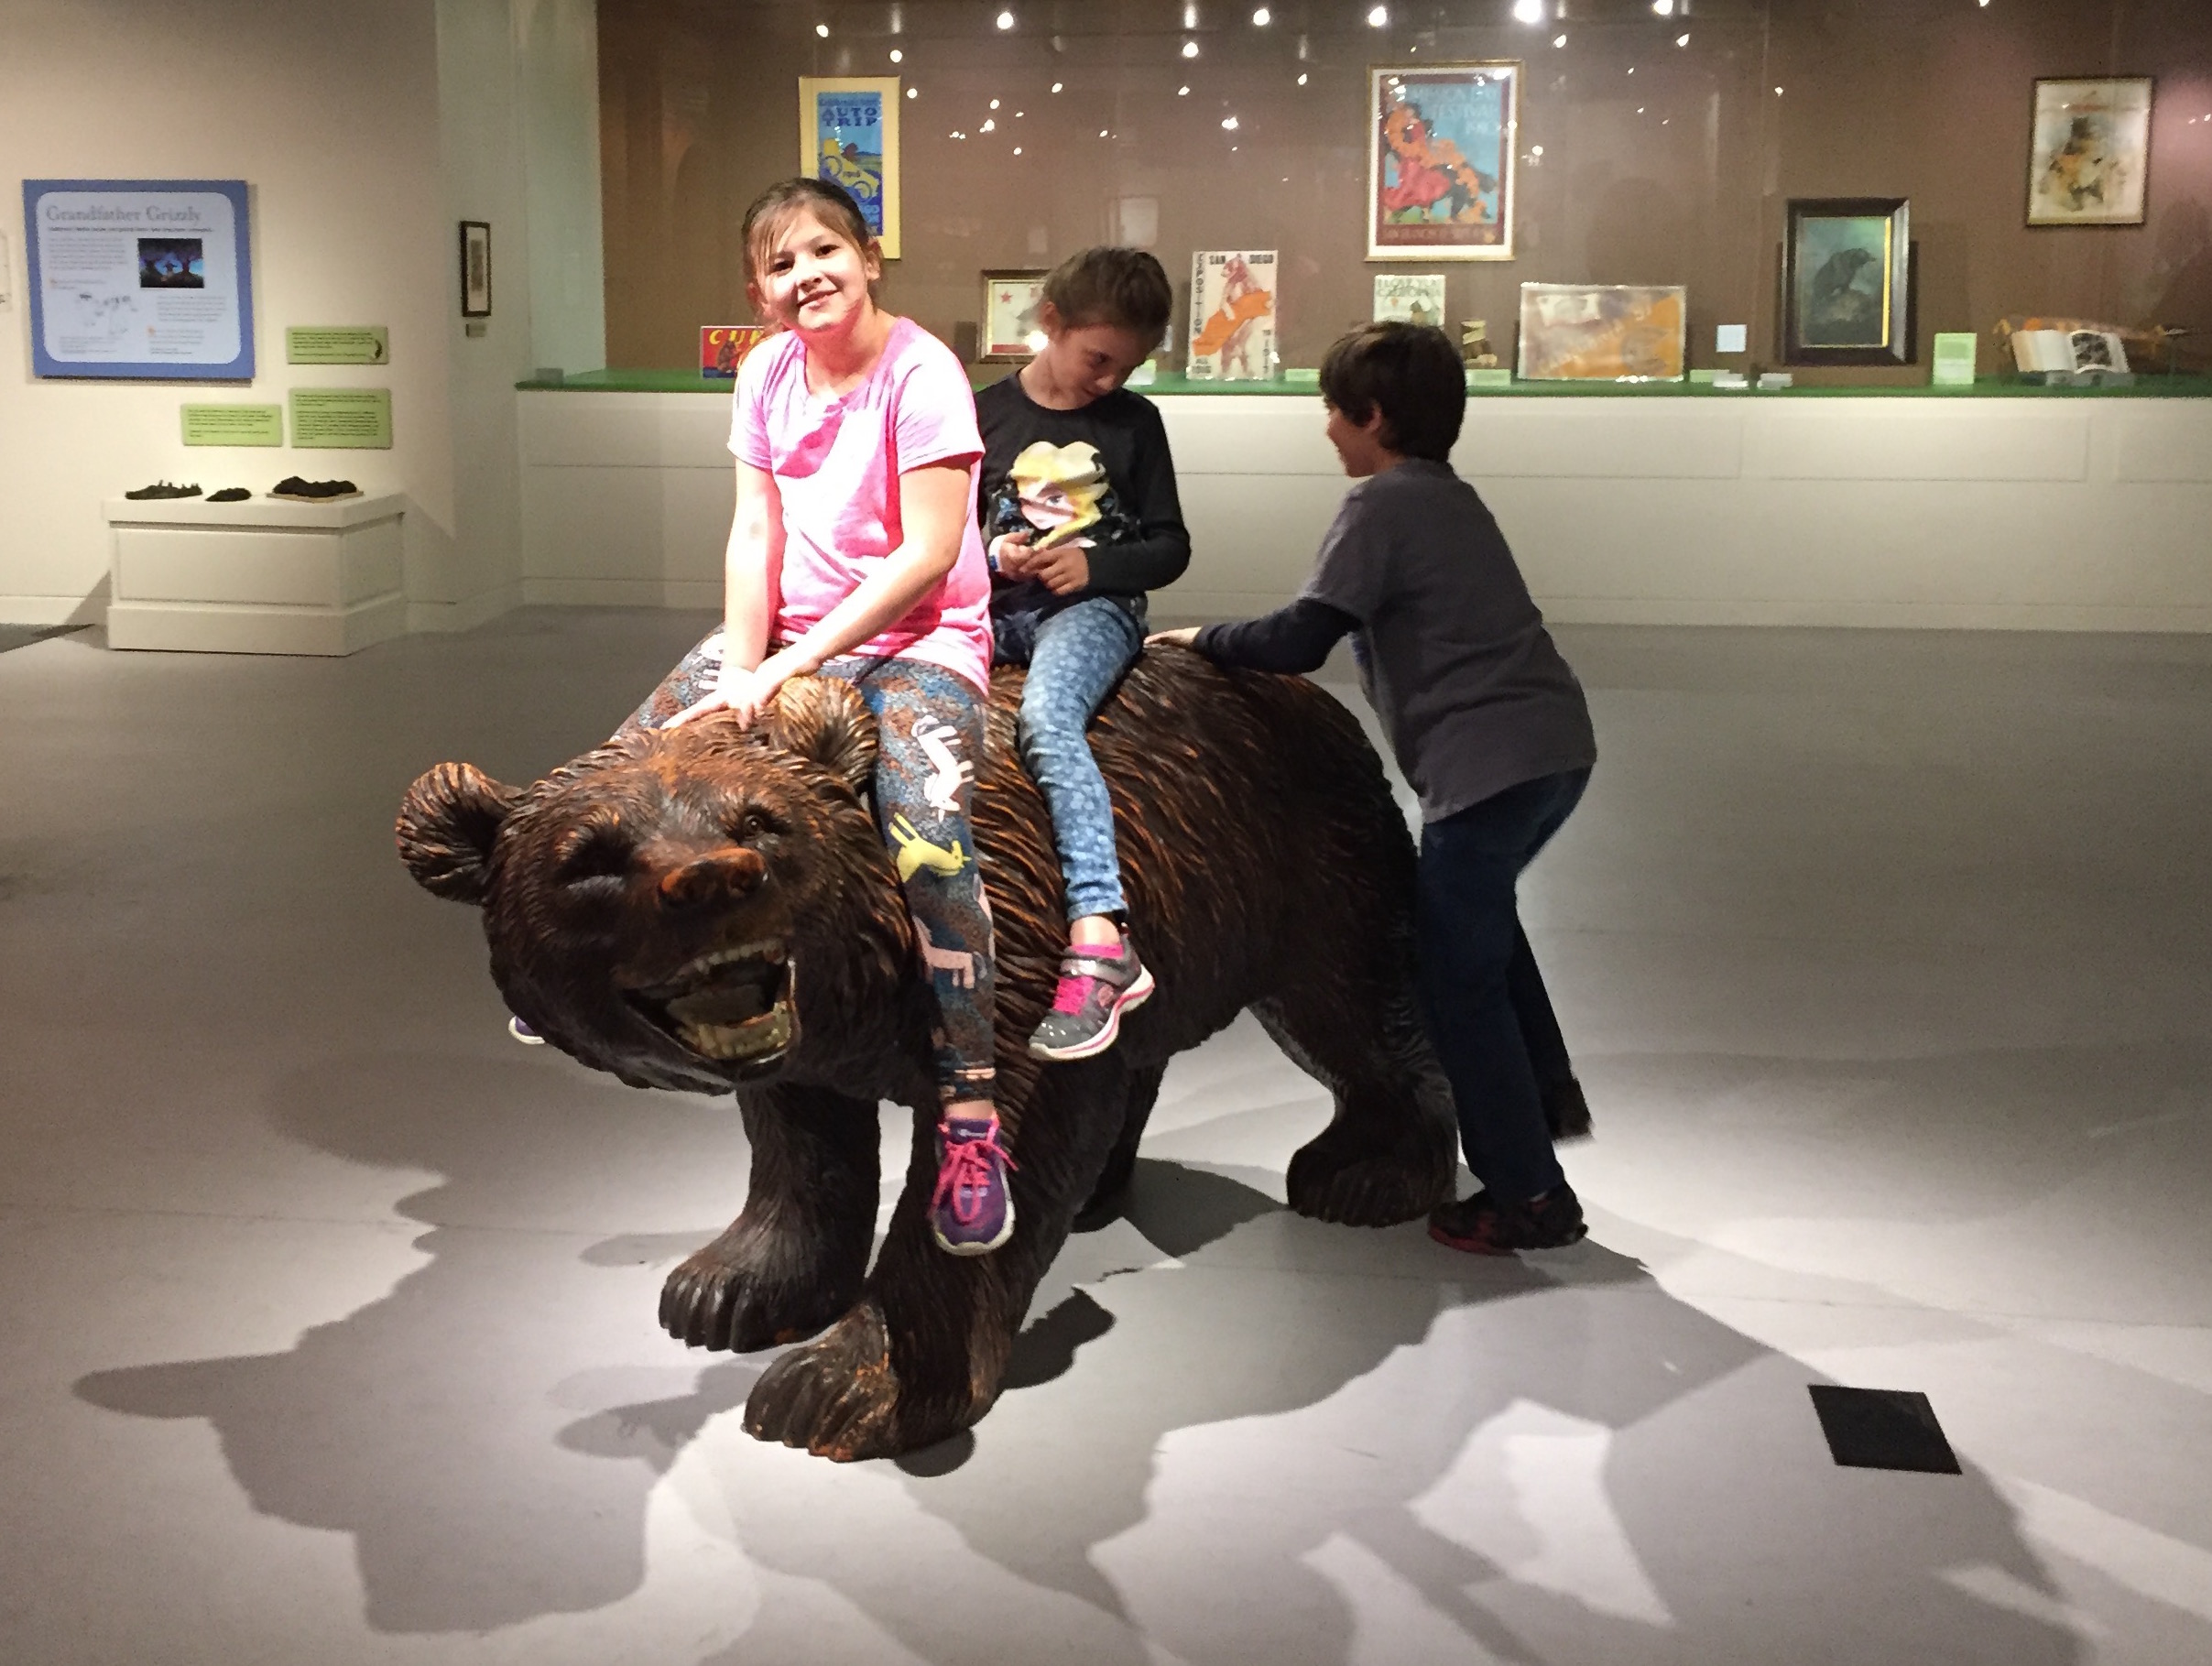 Kids play on a grizzly bear sculpture at the California Museum in Sacramento.